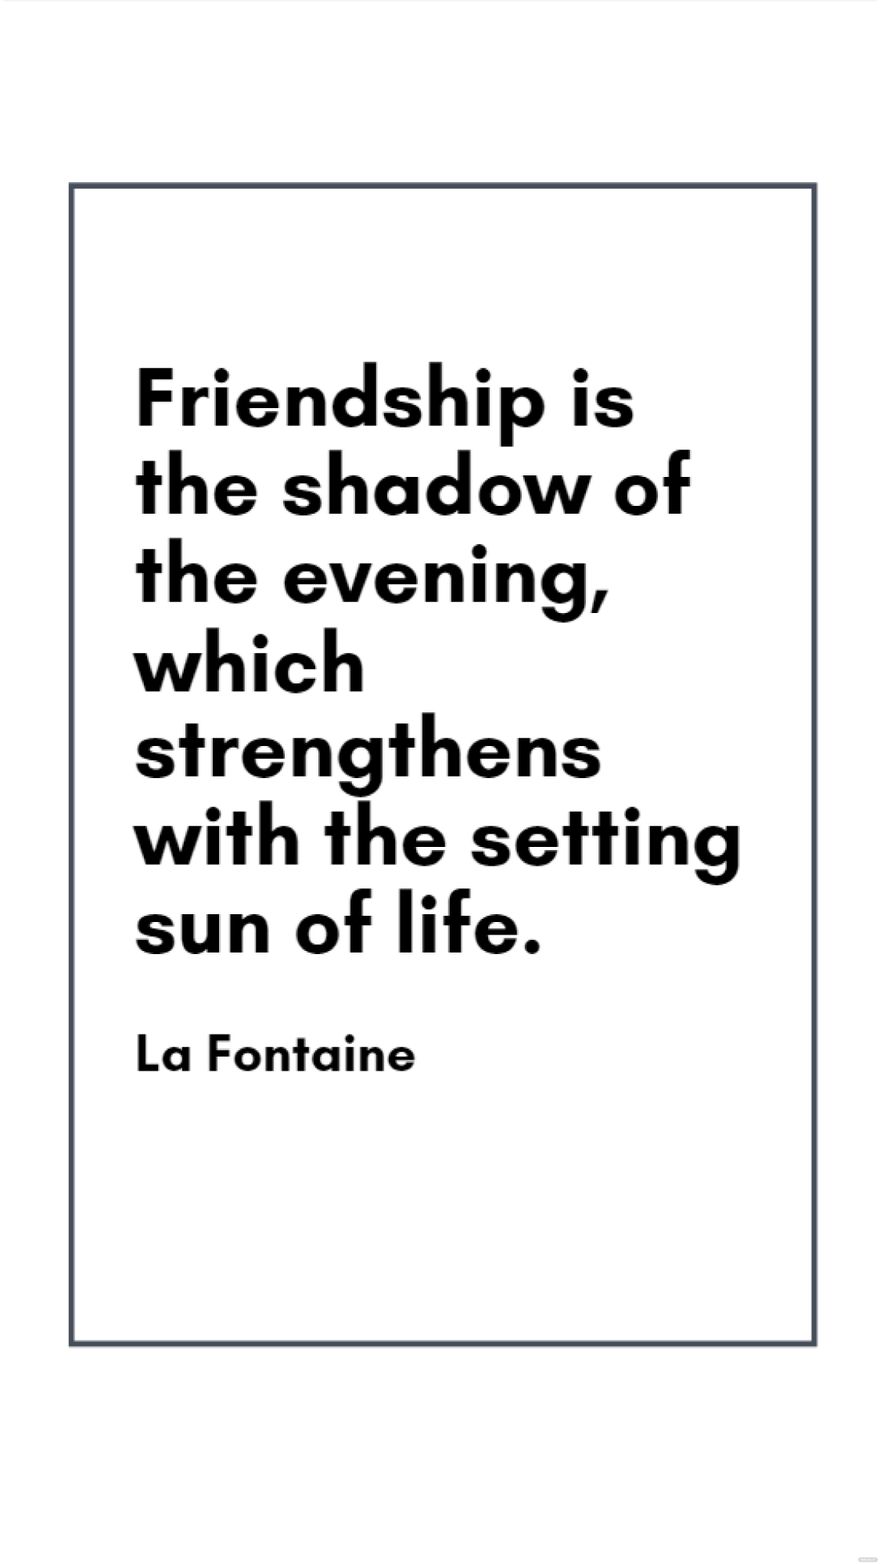 Free La Fontaine - Friendship is the shadow of the evening, which strengthens with the setting sun of life.